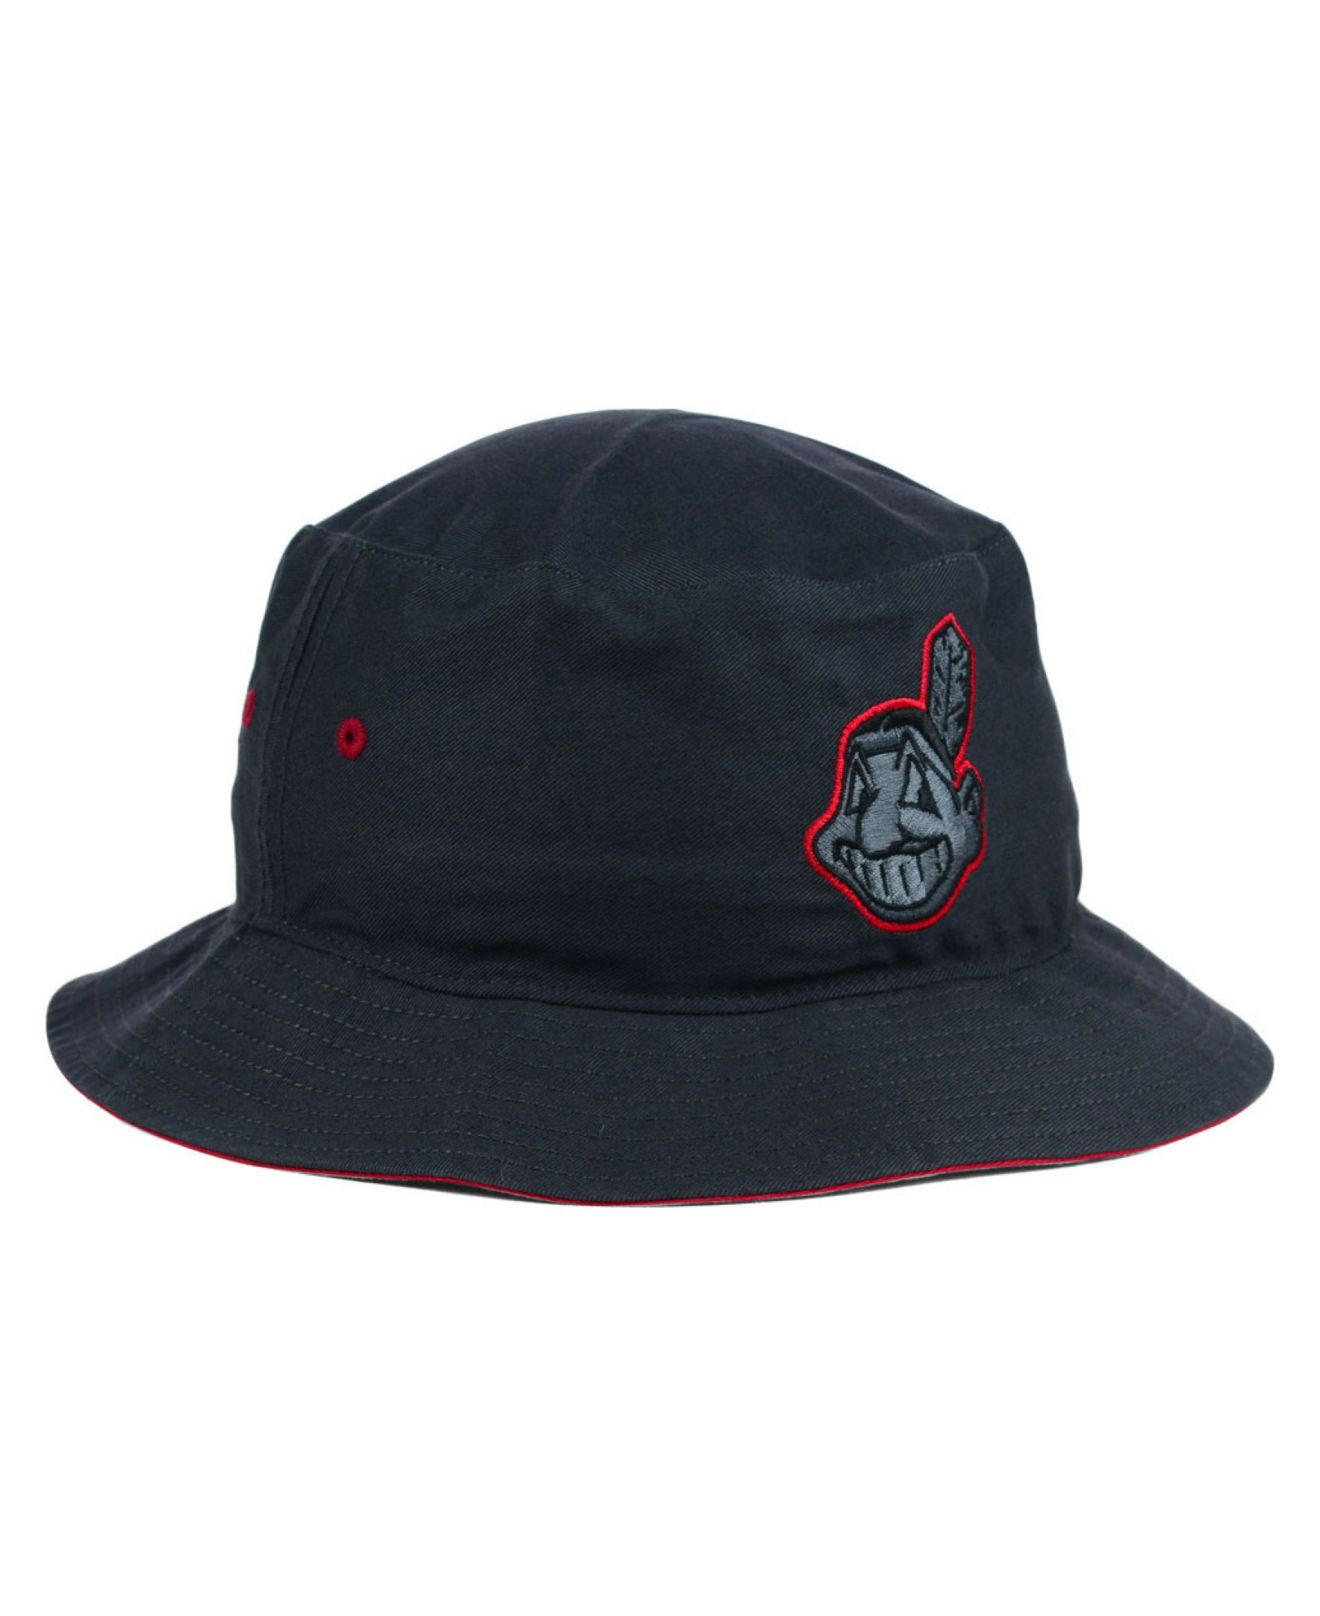 47 brand gray cleveland indians turbo bucket hat product 1 27777419 1 900113346 normal